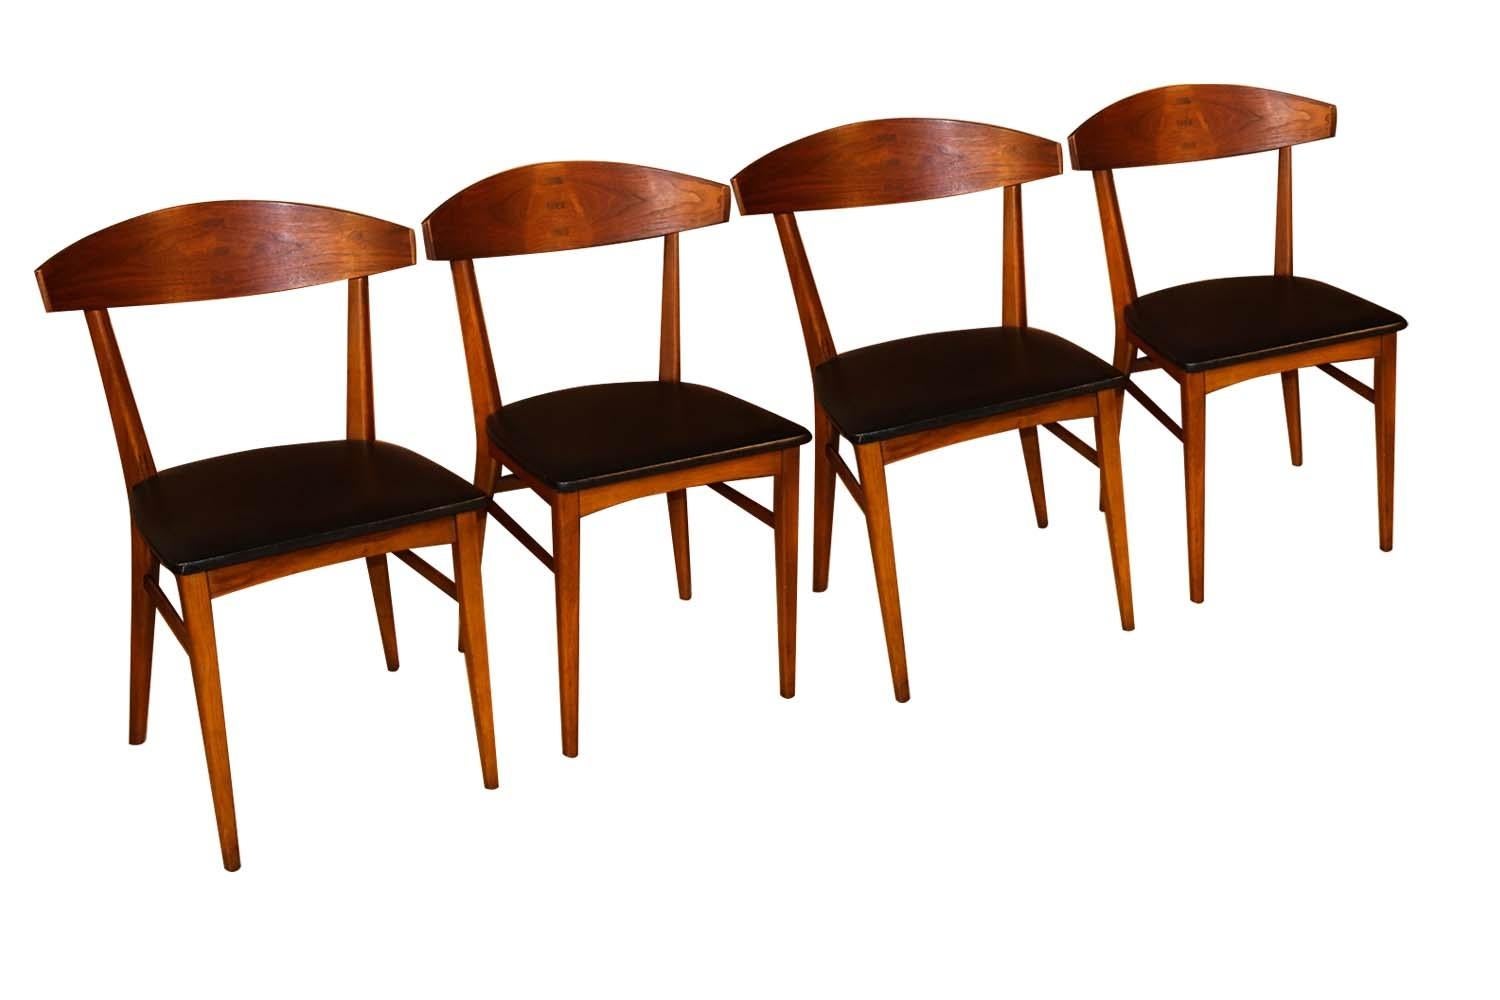 Incredibly well constructed set of four Paul McCobb dining chairs from the Components line of Lane Furniture. This beautiful rare set of walnut dining chairs designed by Paul McCobb in 1962 feature a graceful concave back rest with a centered cross